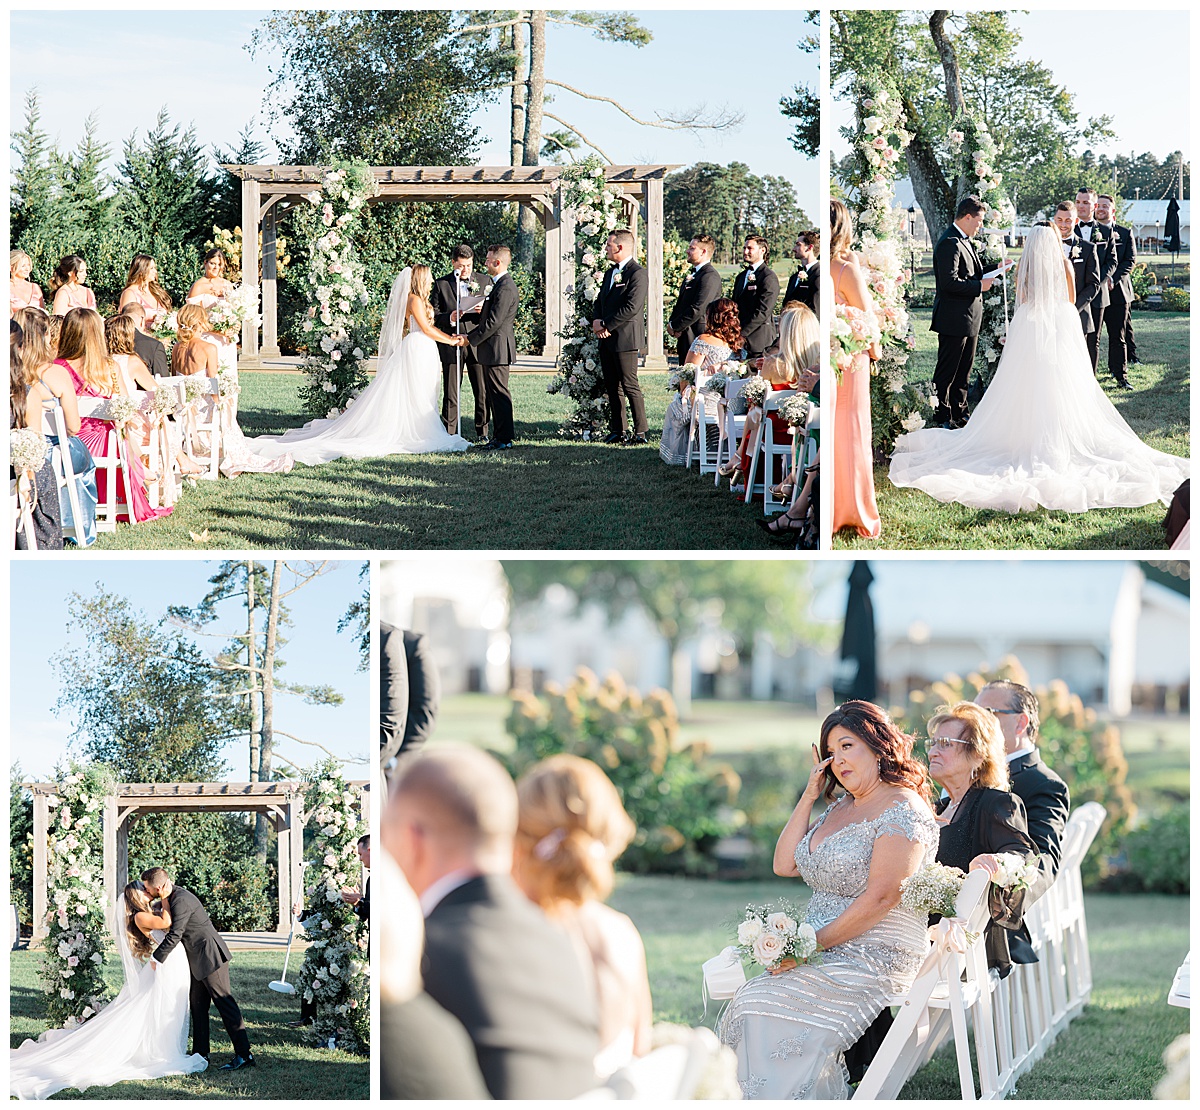 Bride and groom ceremony in garden at Renault Winery. 